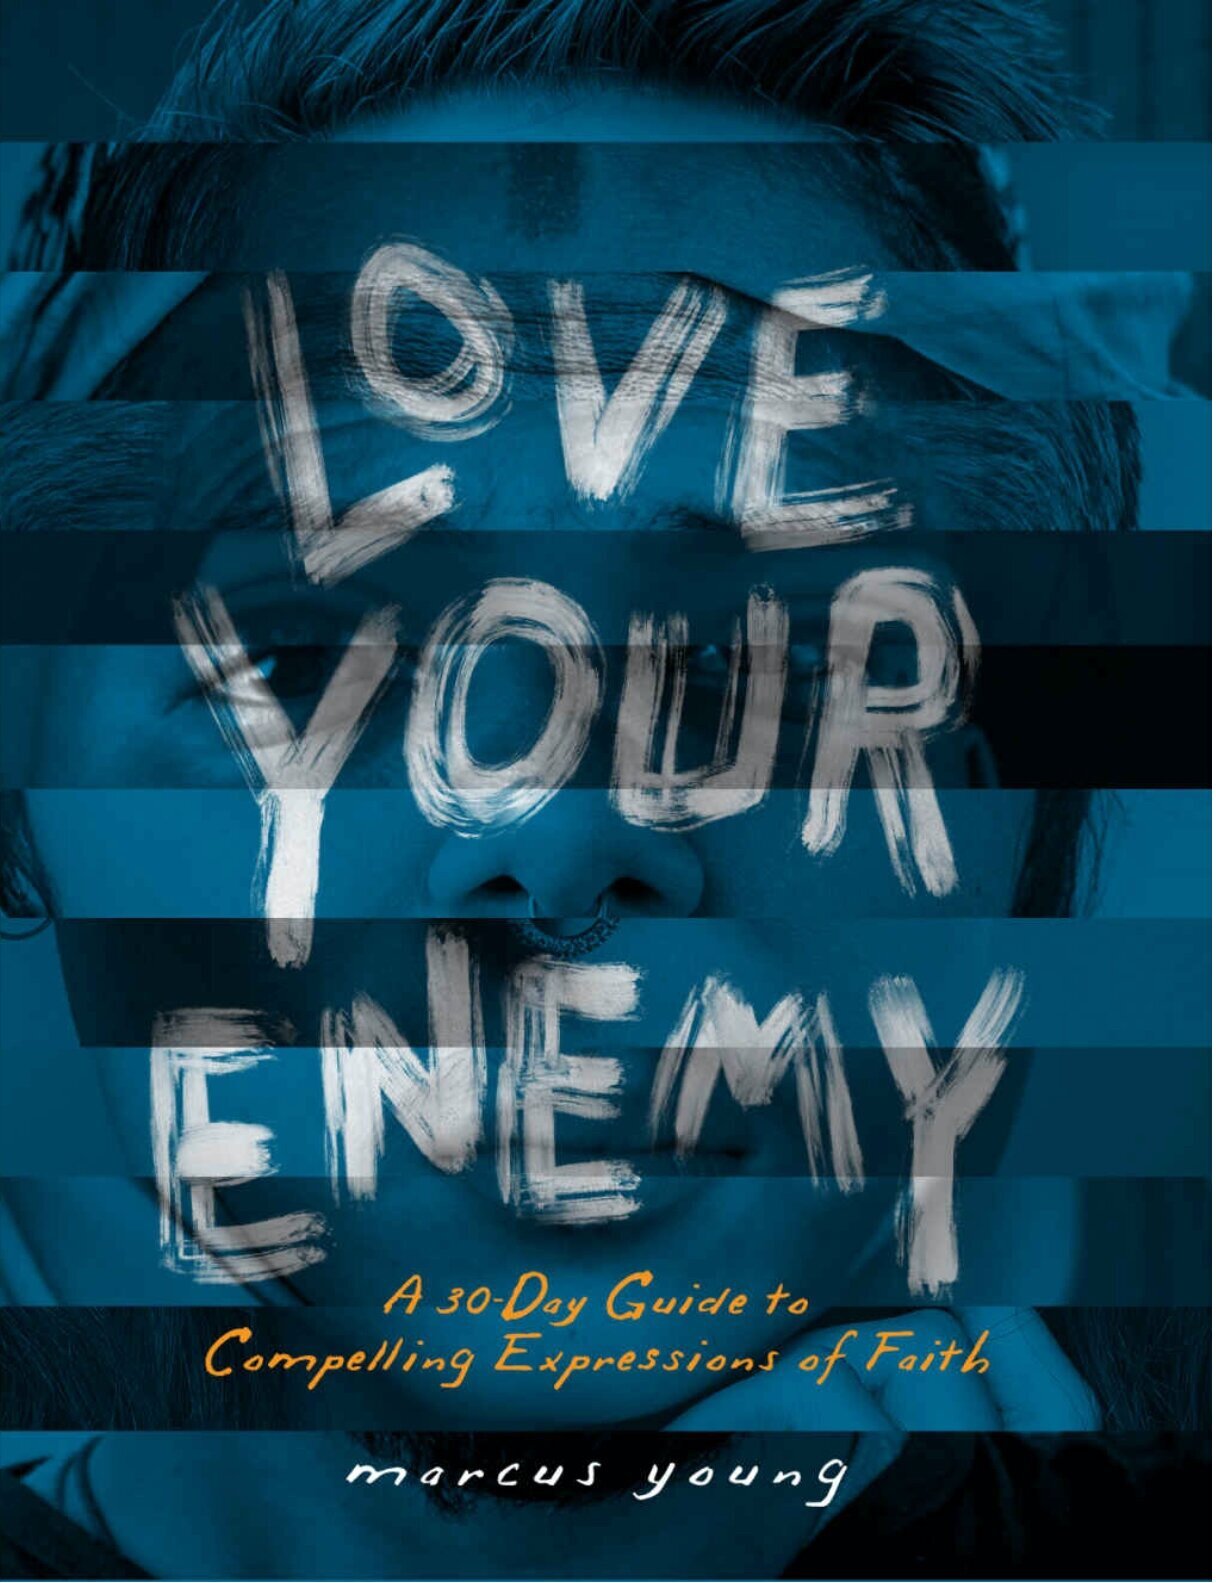 Love Your Enemy is the way of the CROSS - Buy on Amazon https://amzn.to/358Iv62